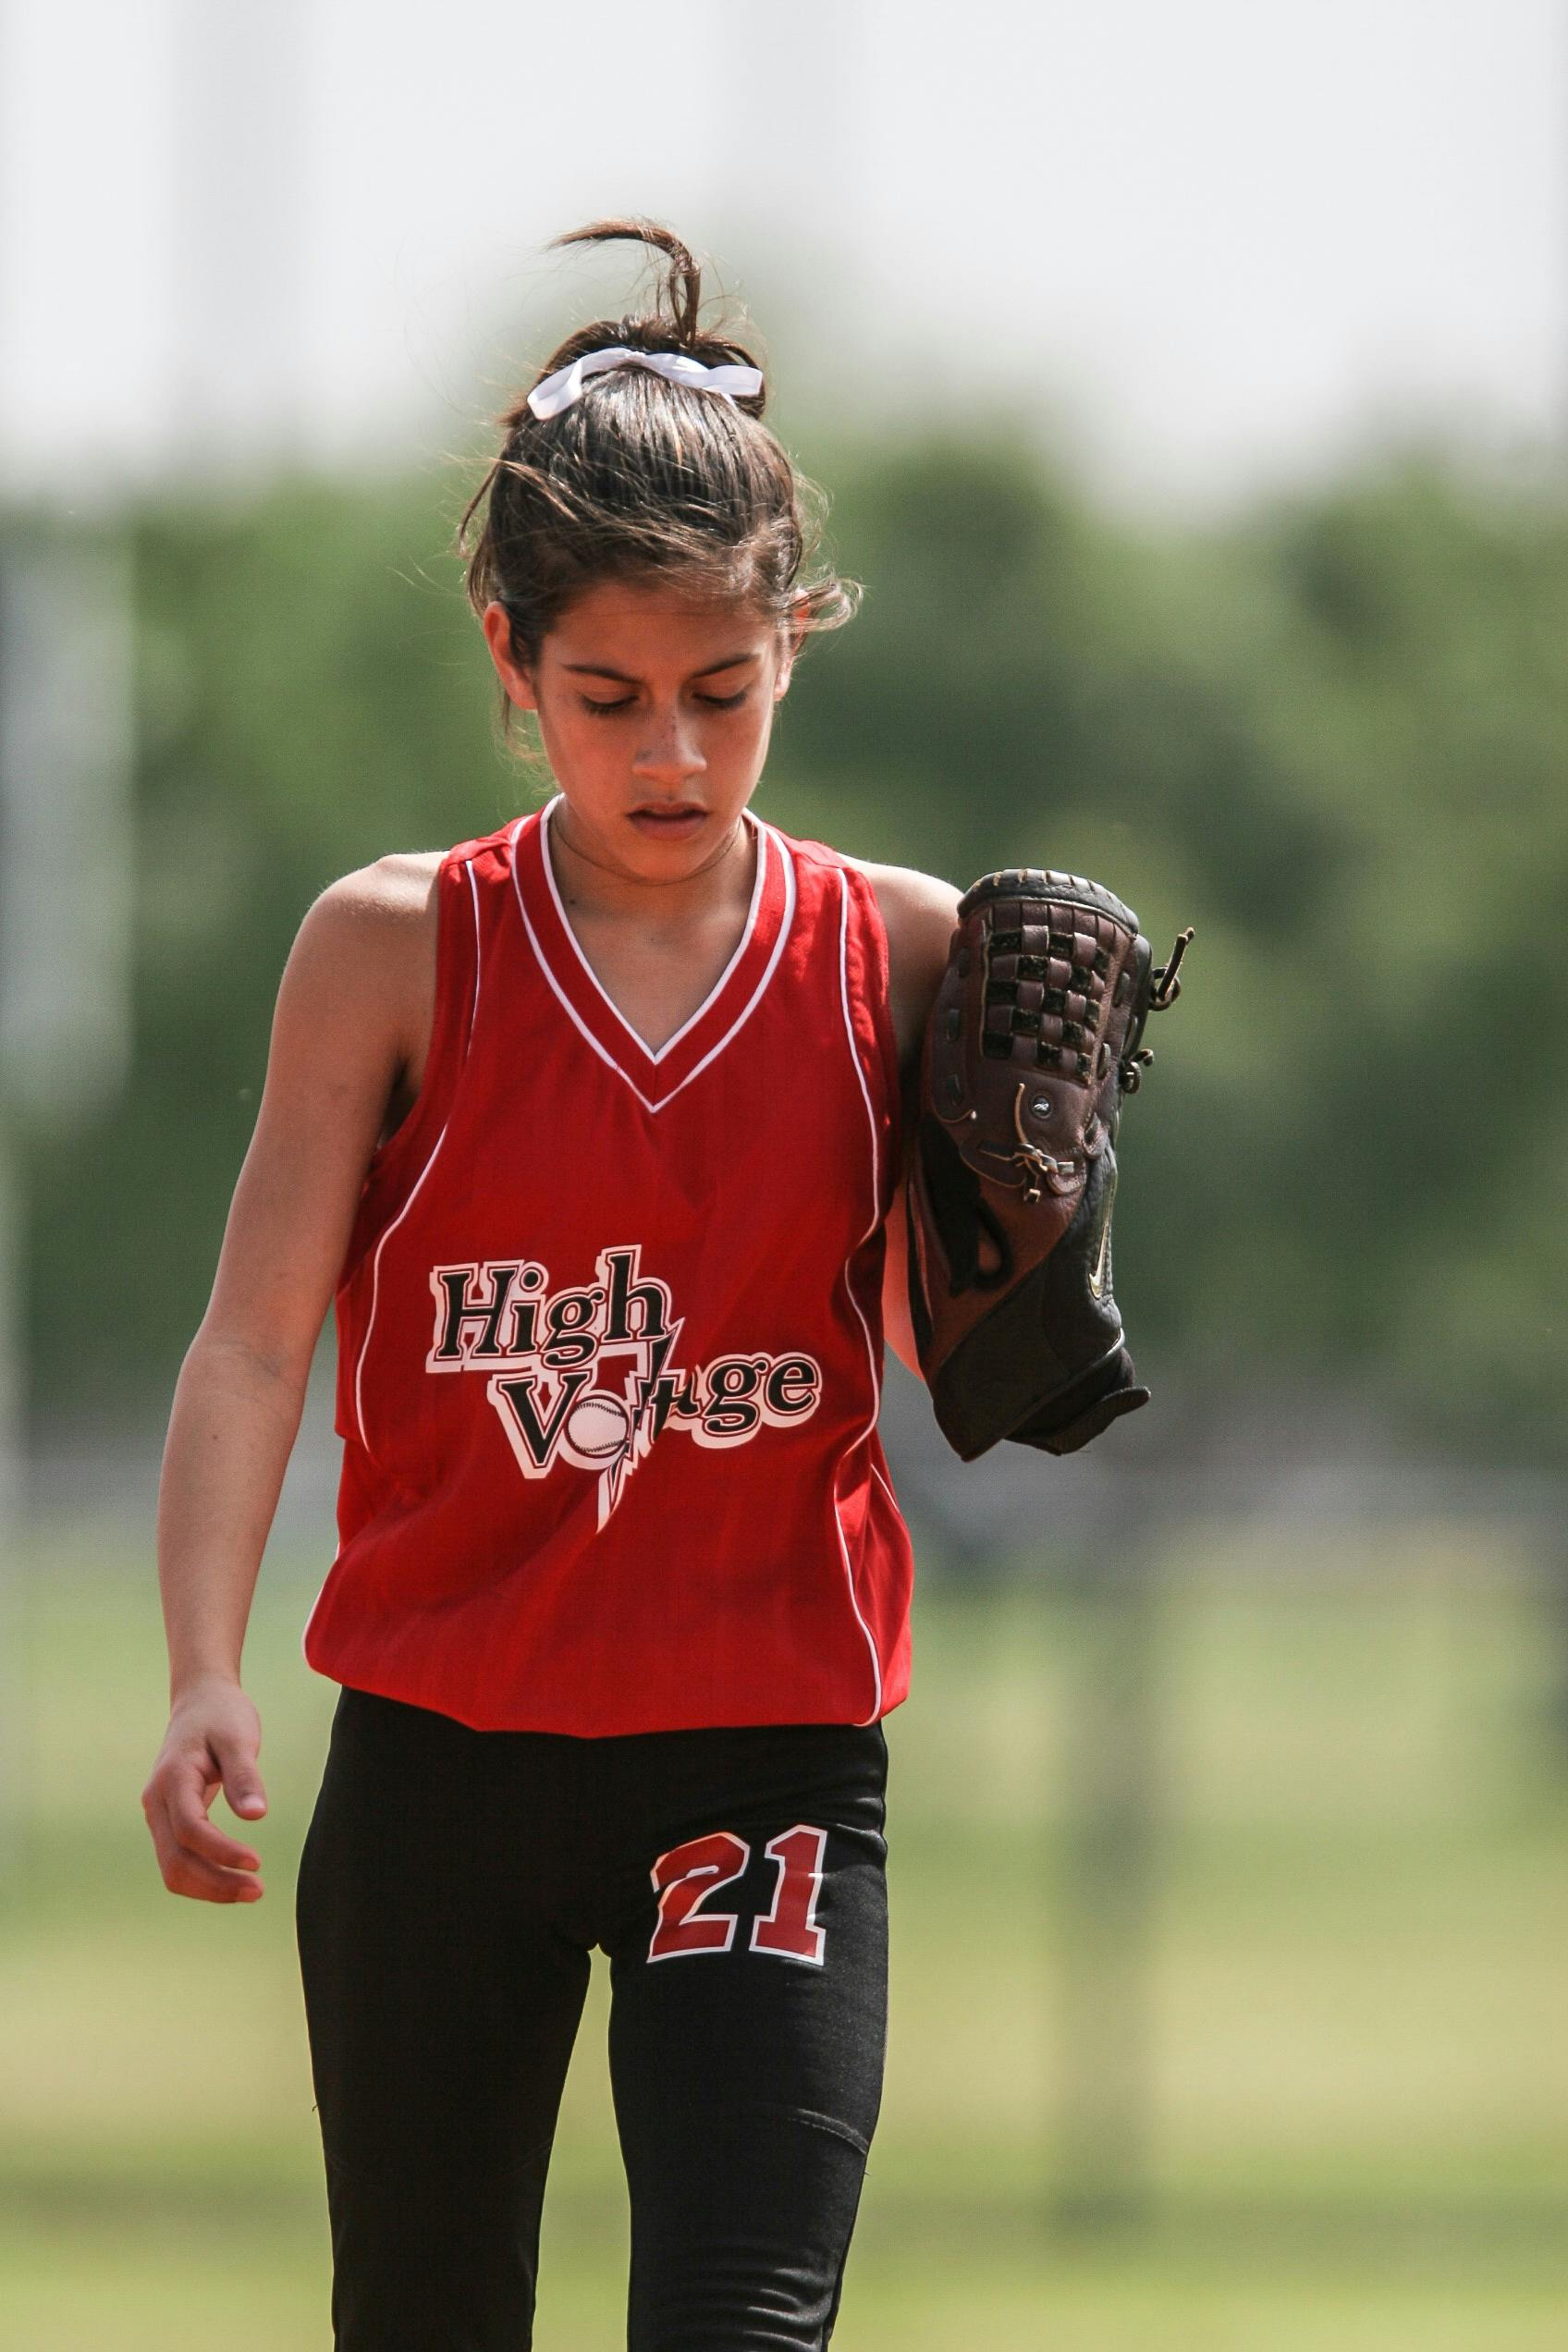 Girl in Red and Black Softball Uniform Walking · Free Stock Photo